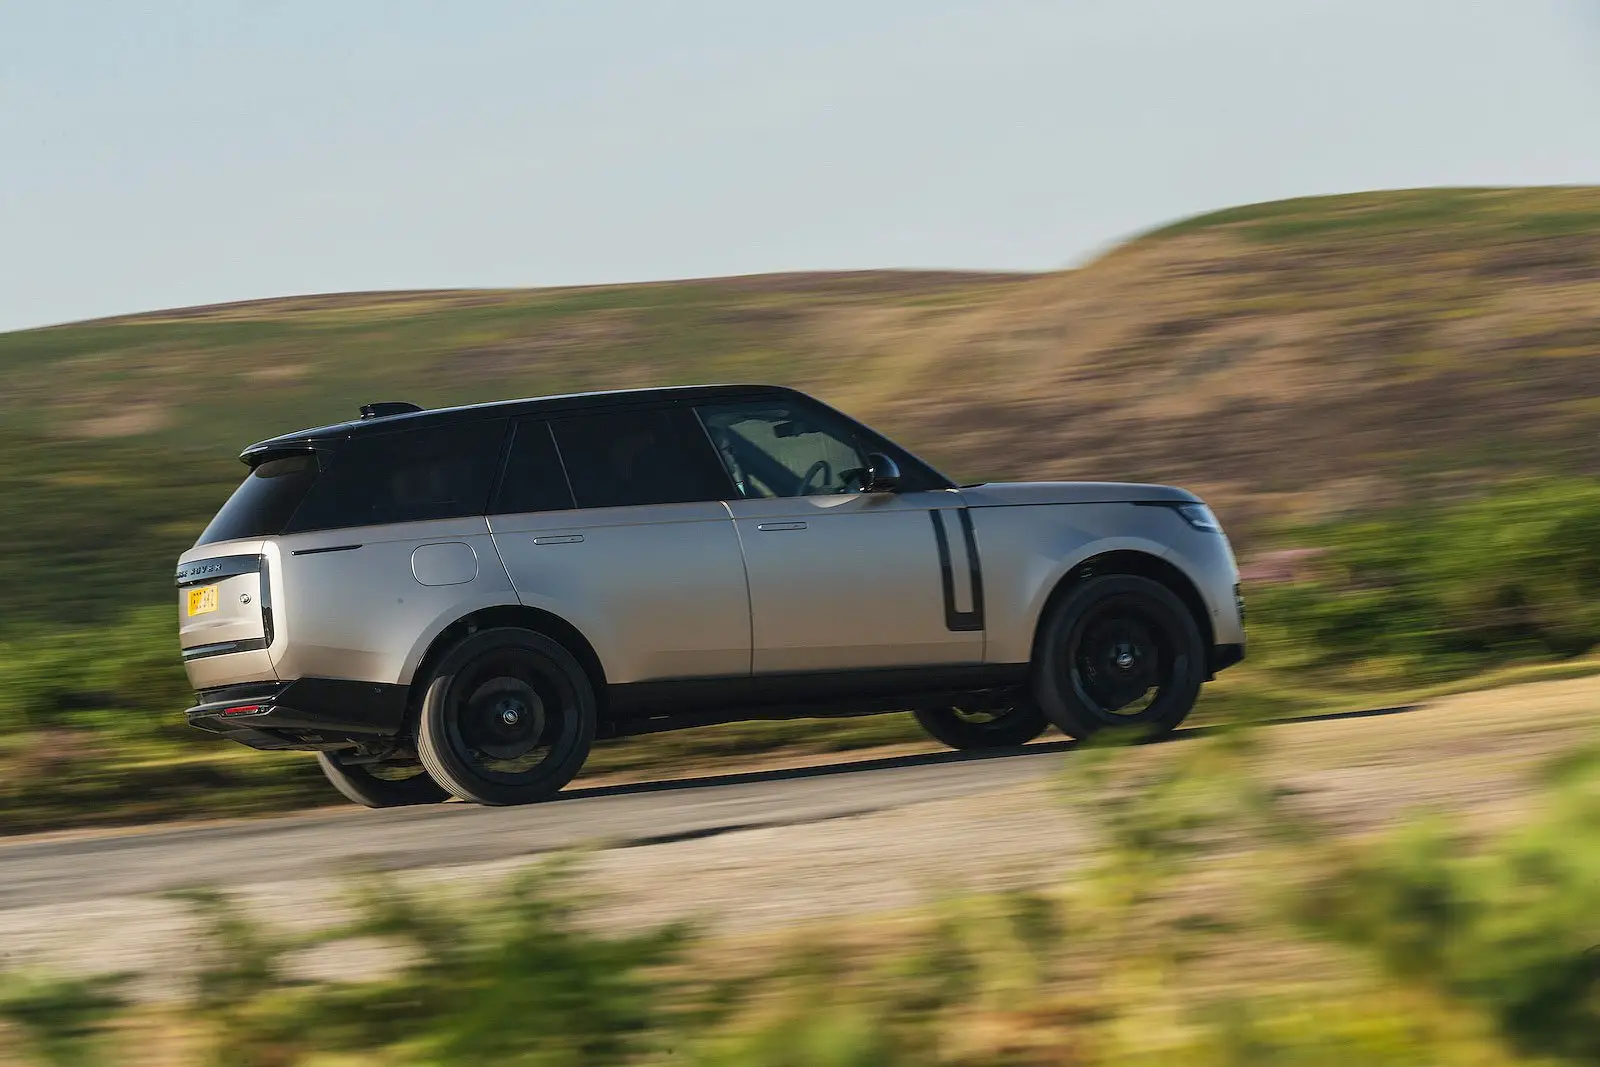 Leasing vs buying a Range Rover - which is better for you?